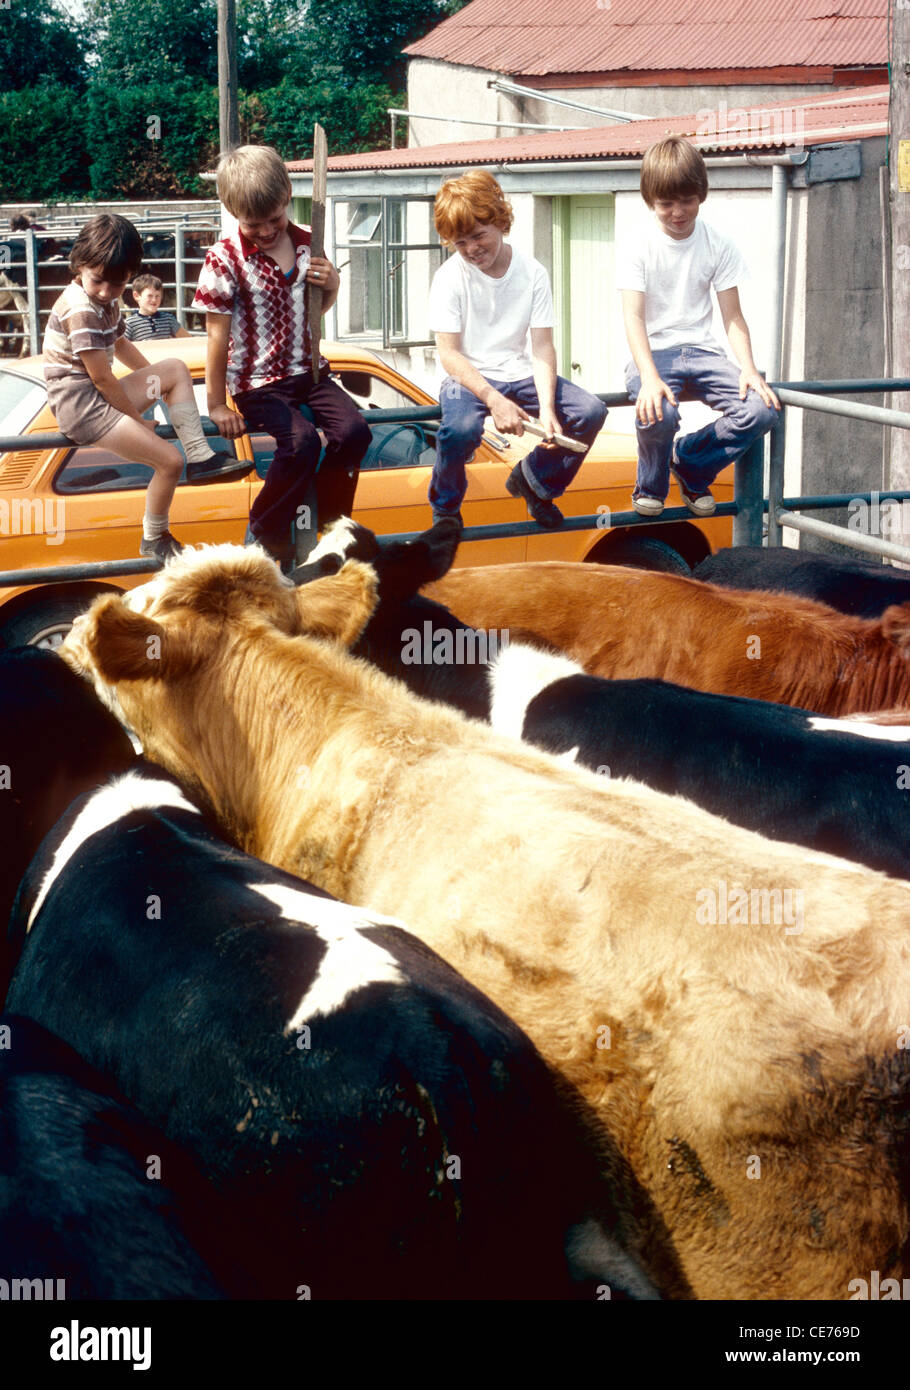 Four young boys with cattle at the Mart in Aughrim Co Wicklow Ireland Stock Photo